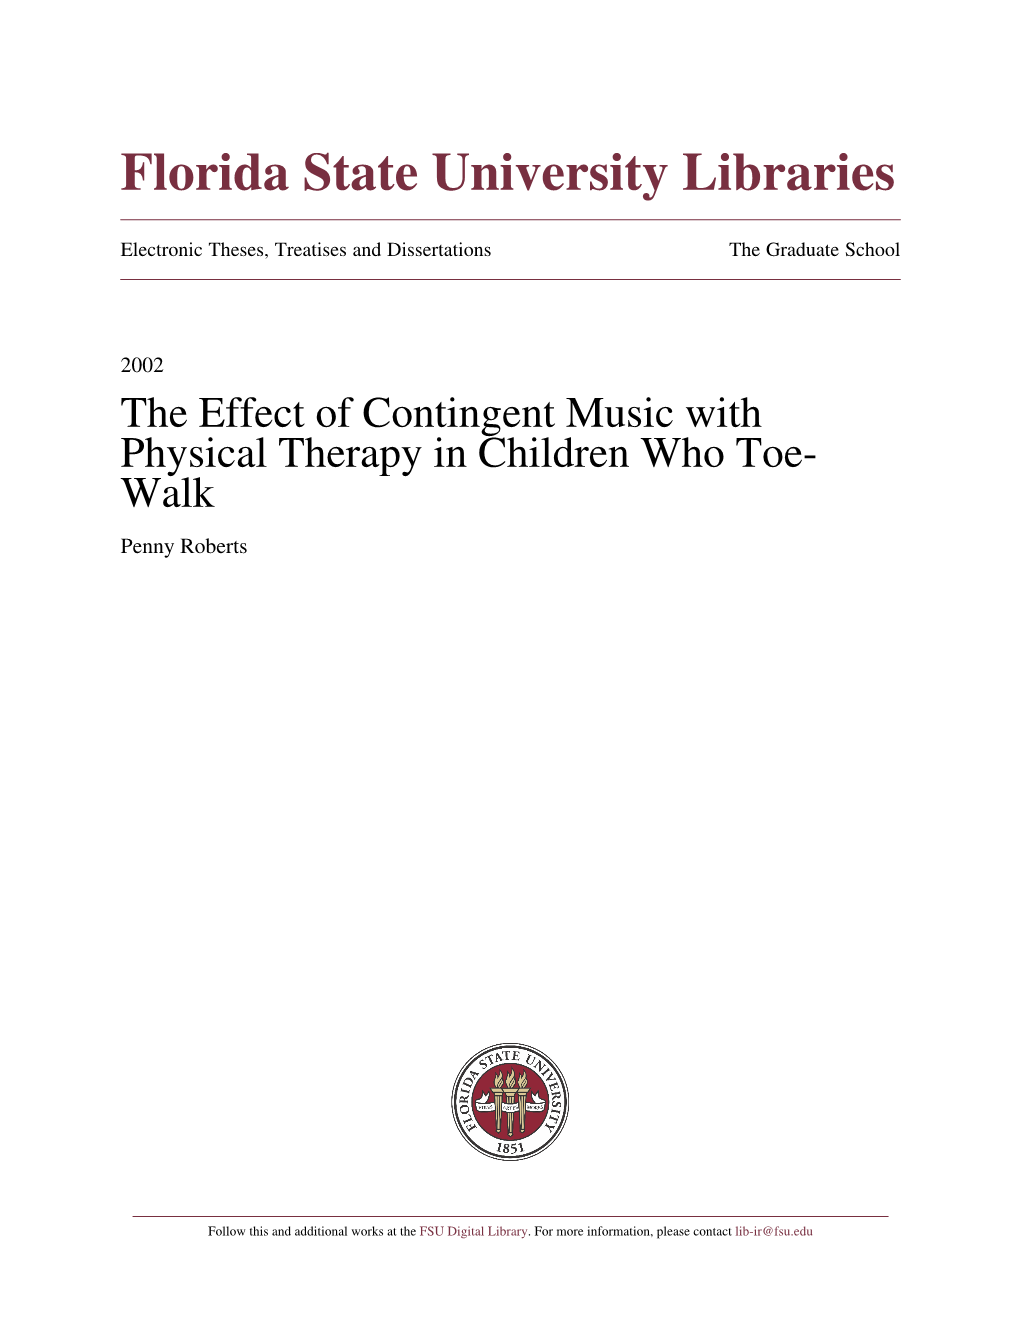 The Effect of Contingent Music with Physical Therapy in Children Who Toe- Walk Penny Roberts